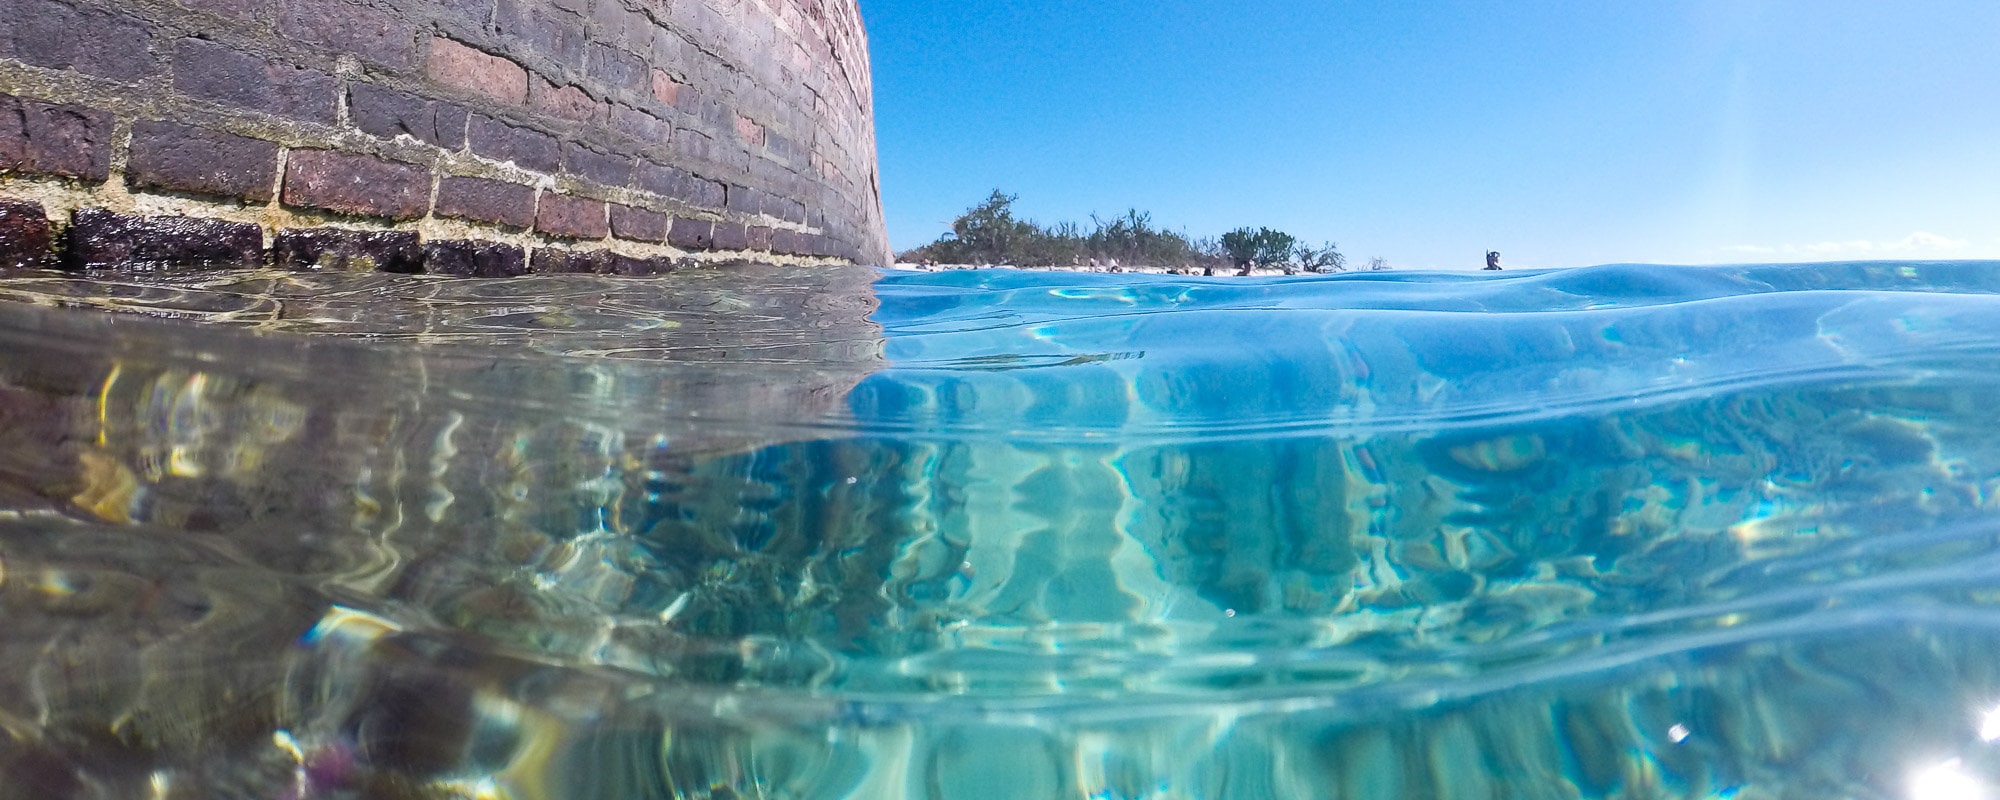 Snorkeling at the Moat of Fort Jefferson in Dry Tortugas National Park, Florida